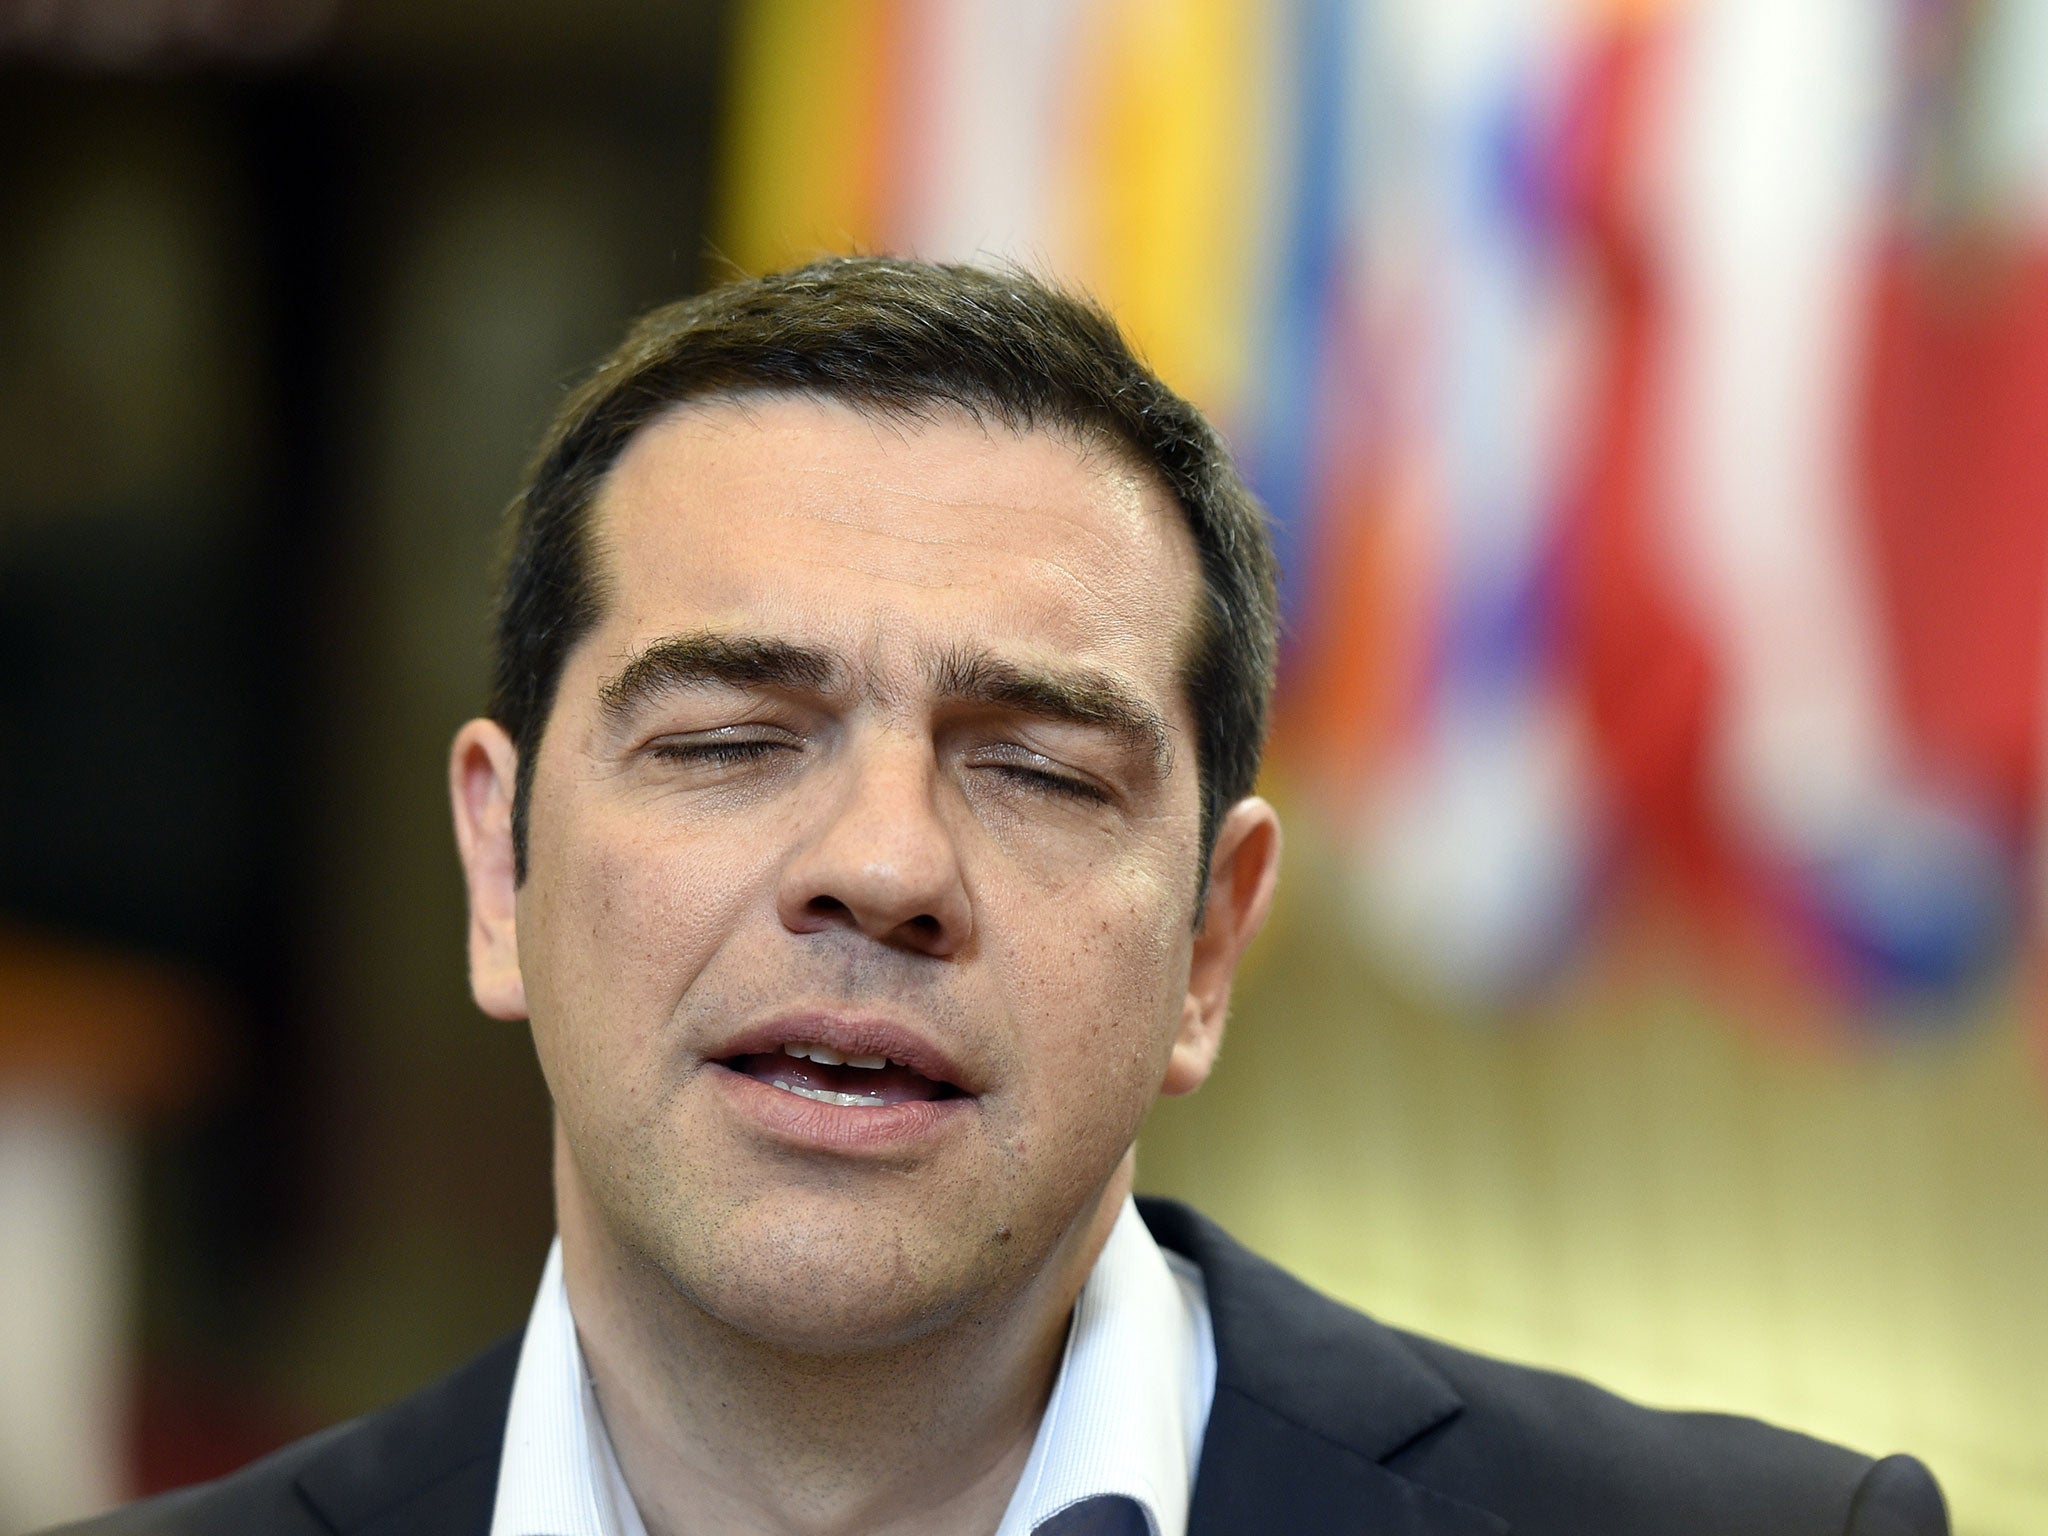 The EU knew Alexis Tsipras would accept anything rather than abandon the euro